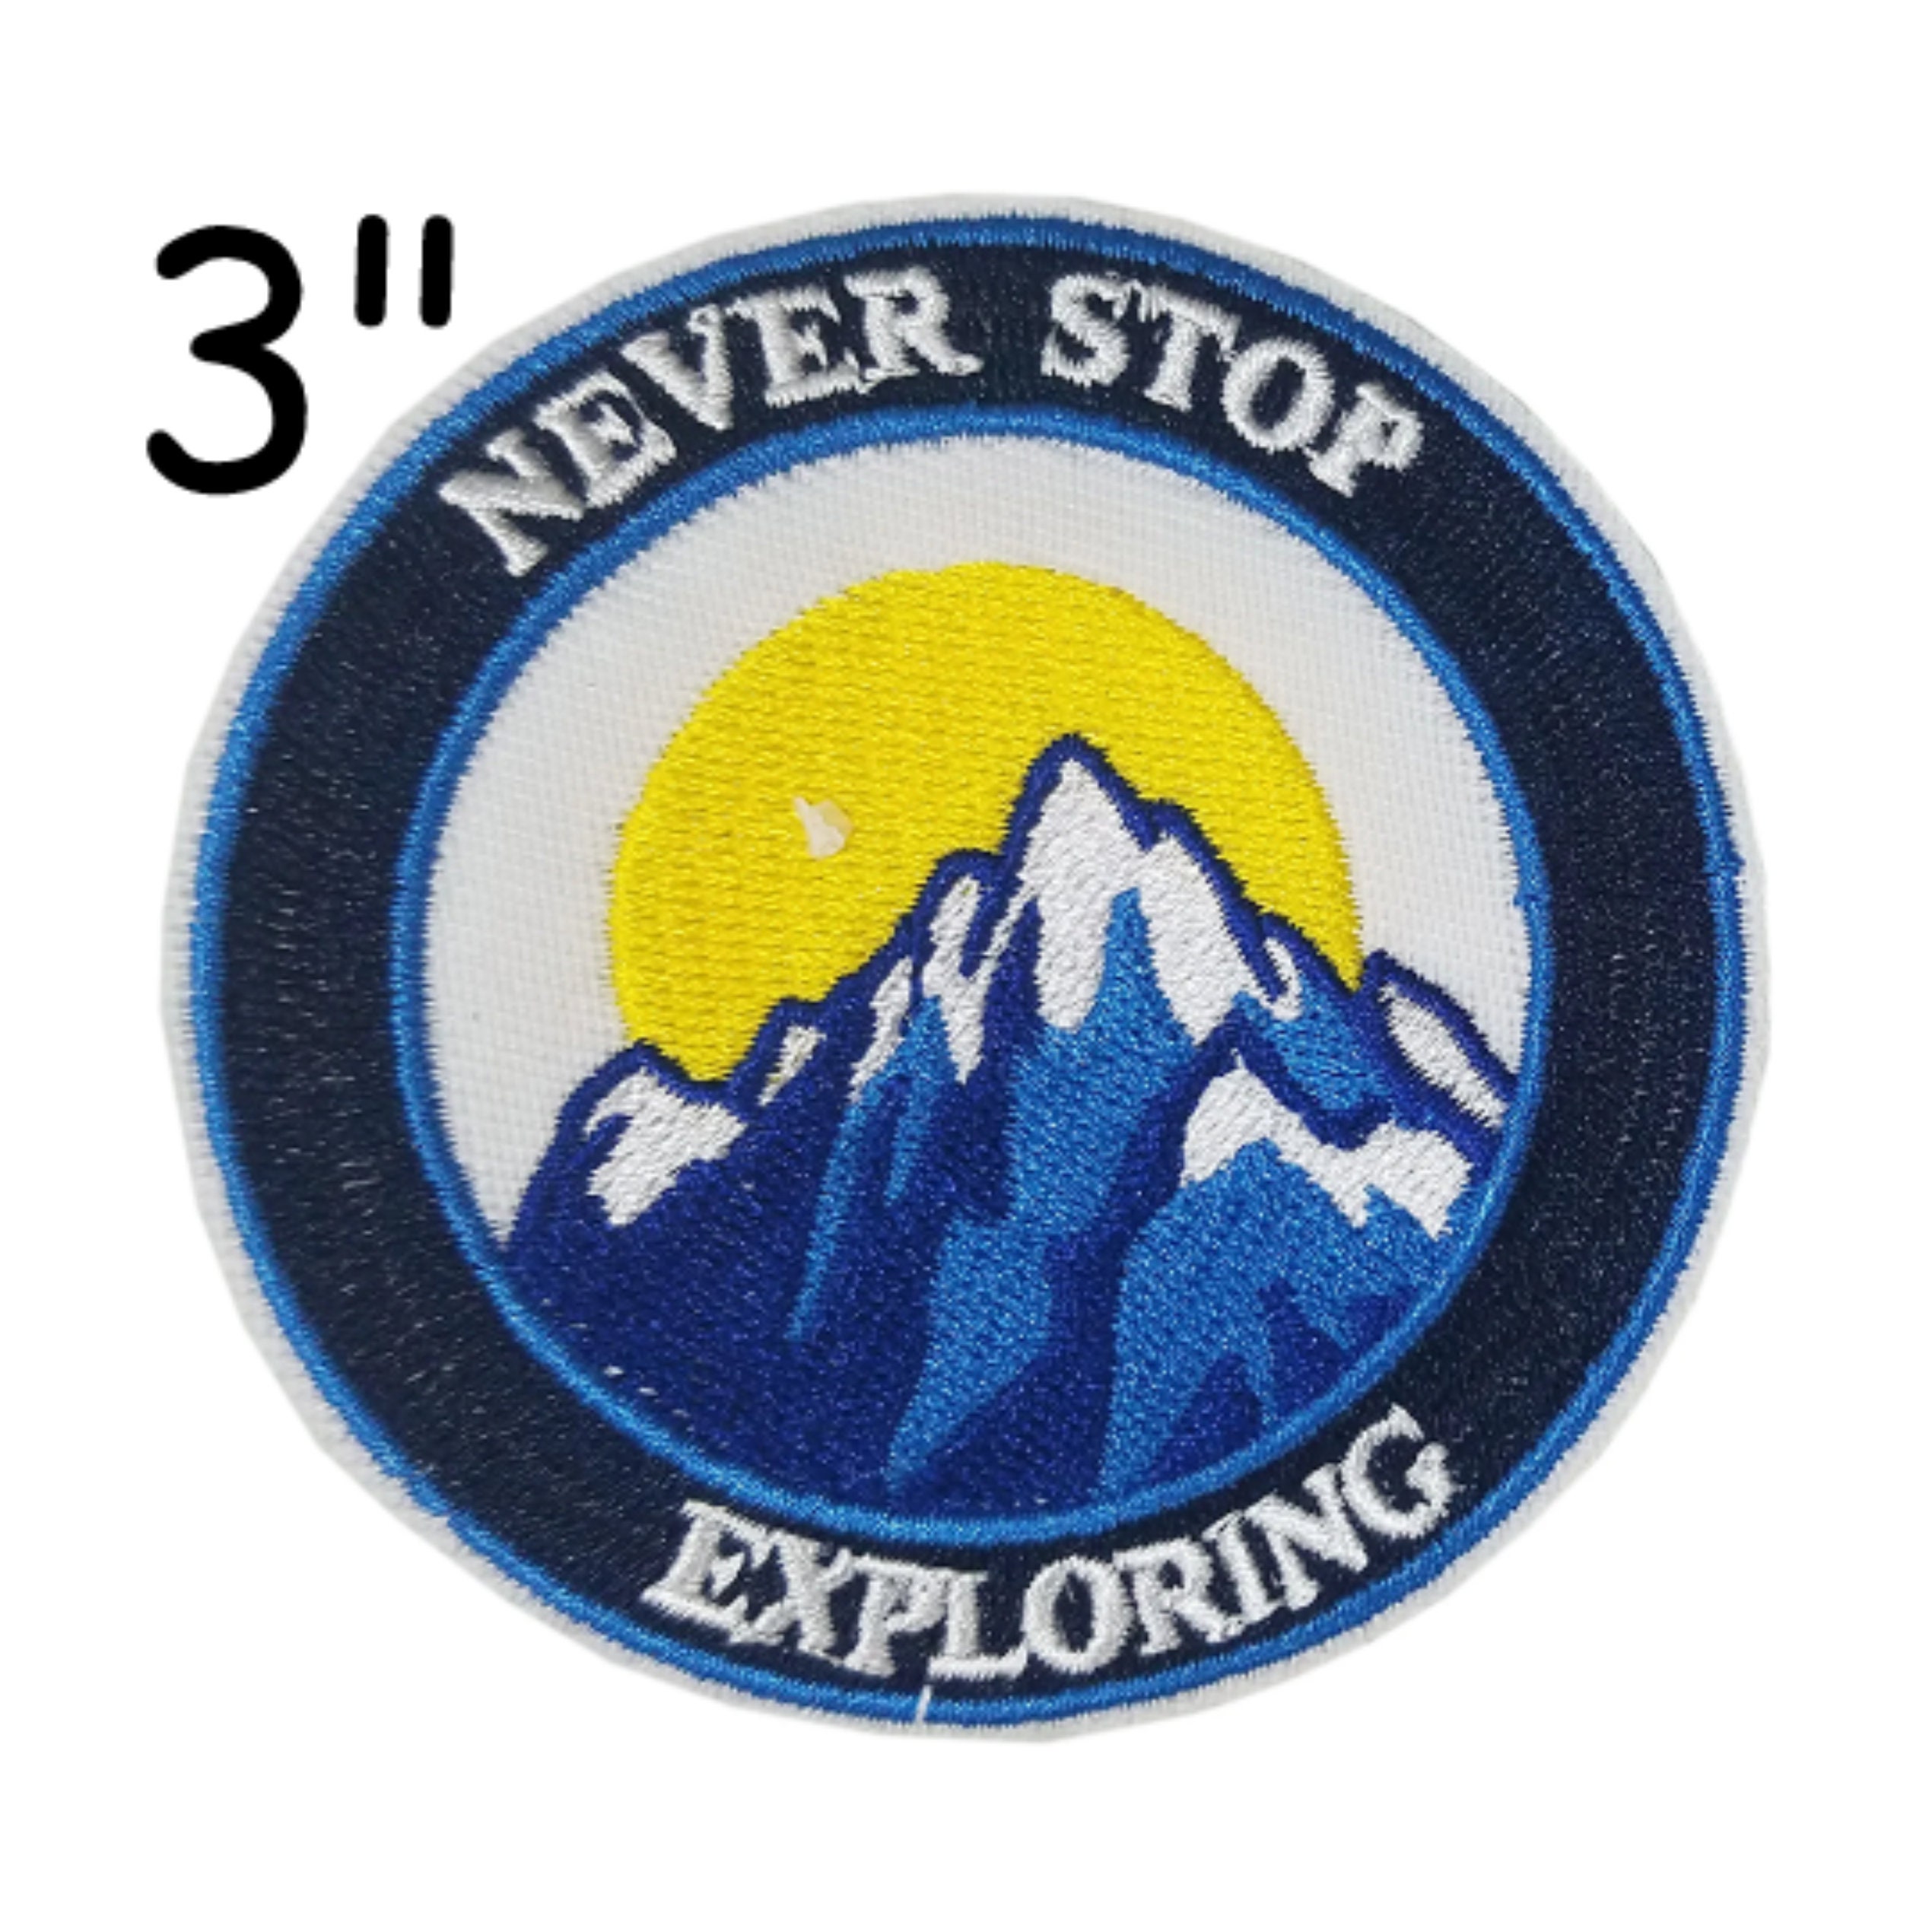 Explore Grand Teton National Park 3 Embroidered Patch Iron-on or Sew-on Outdoor Series Embroidered Patch Iron-on or Sew-on Emblem Badge DIY Appliques Application Patches 